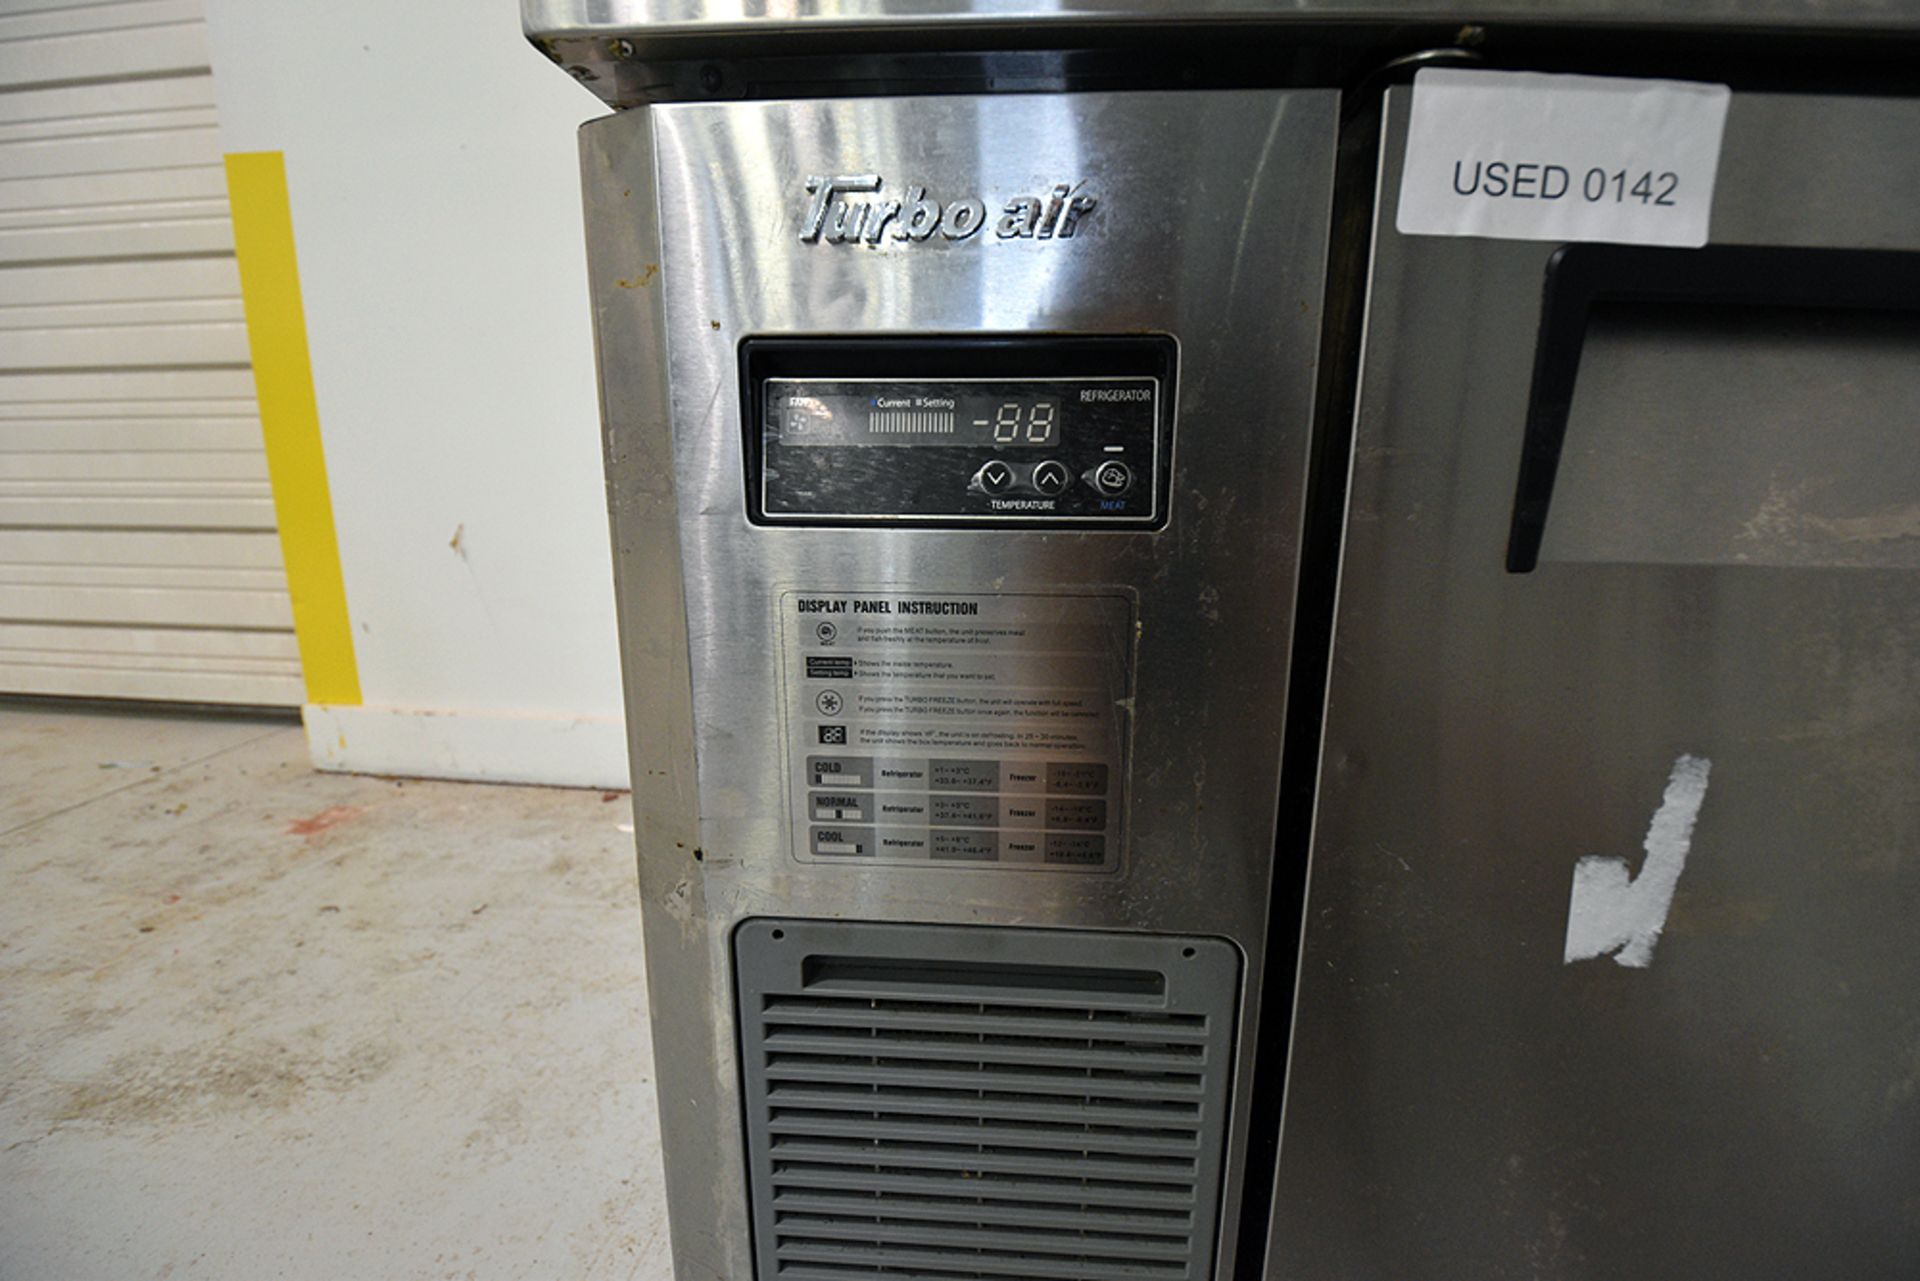 Turbo Air Model JUR-48 Refrigerated Cabinet - Image 6 of 8